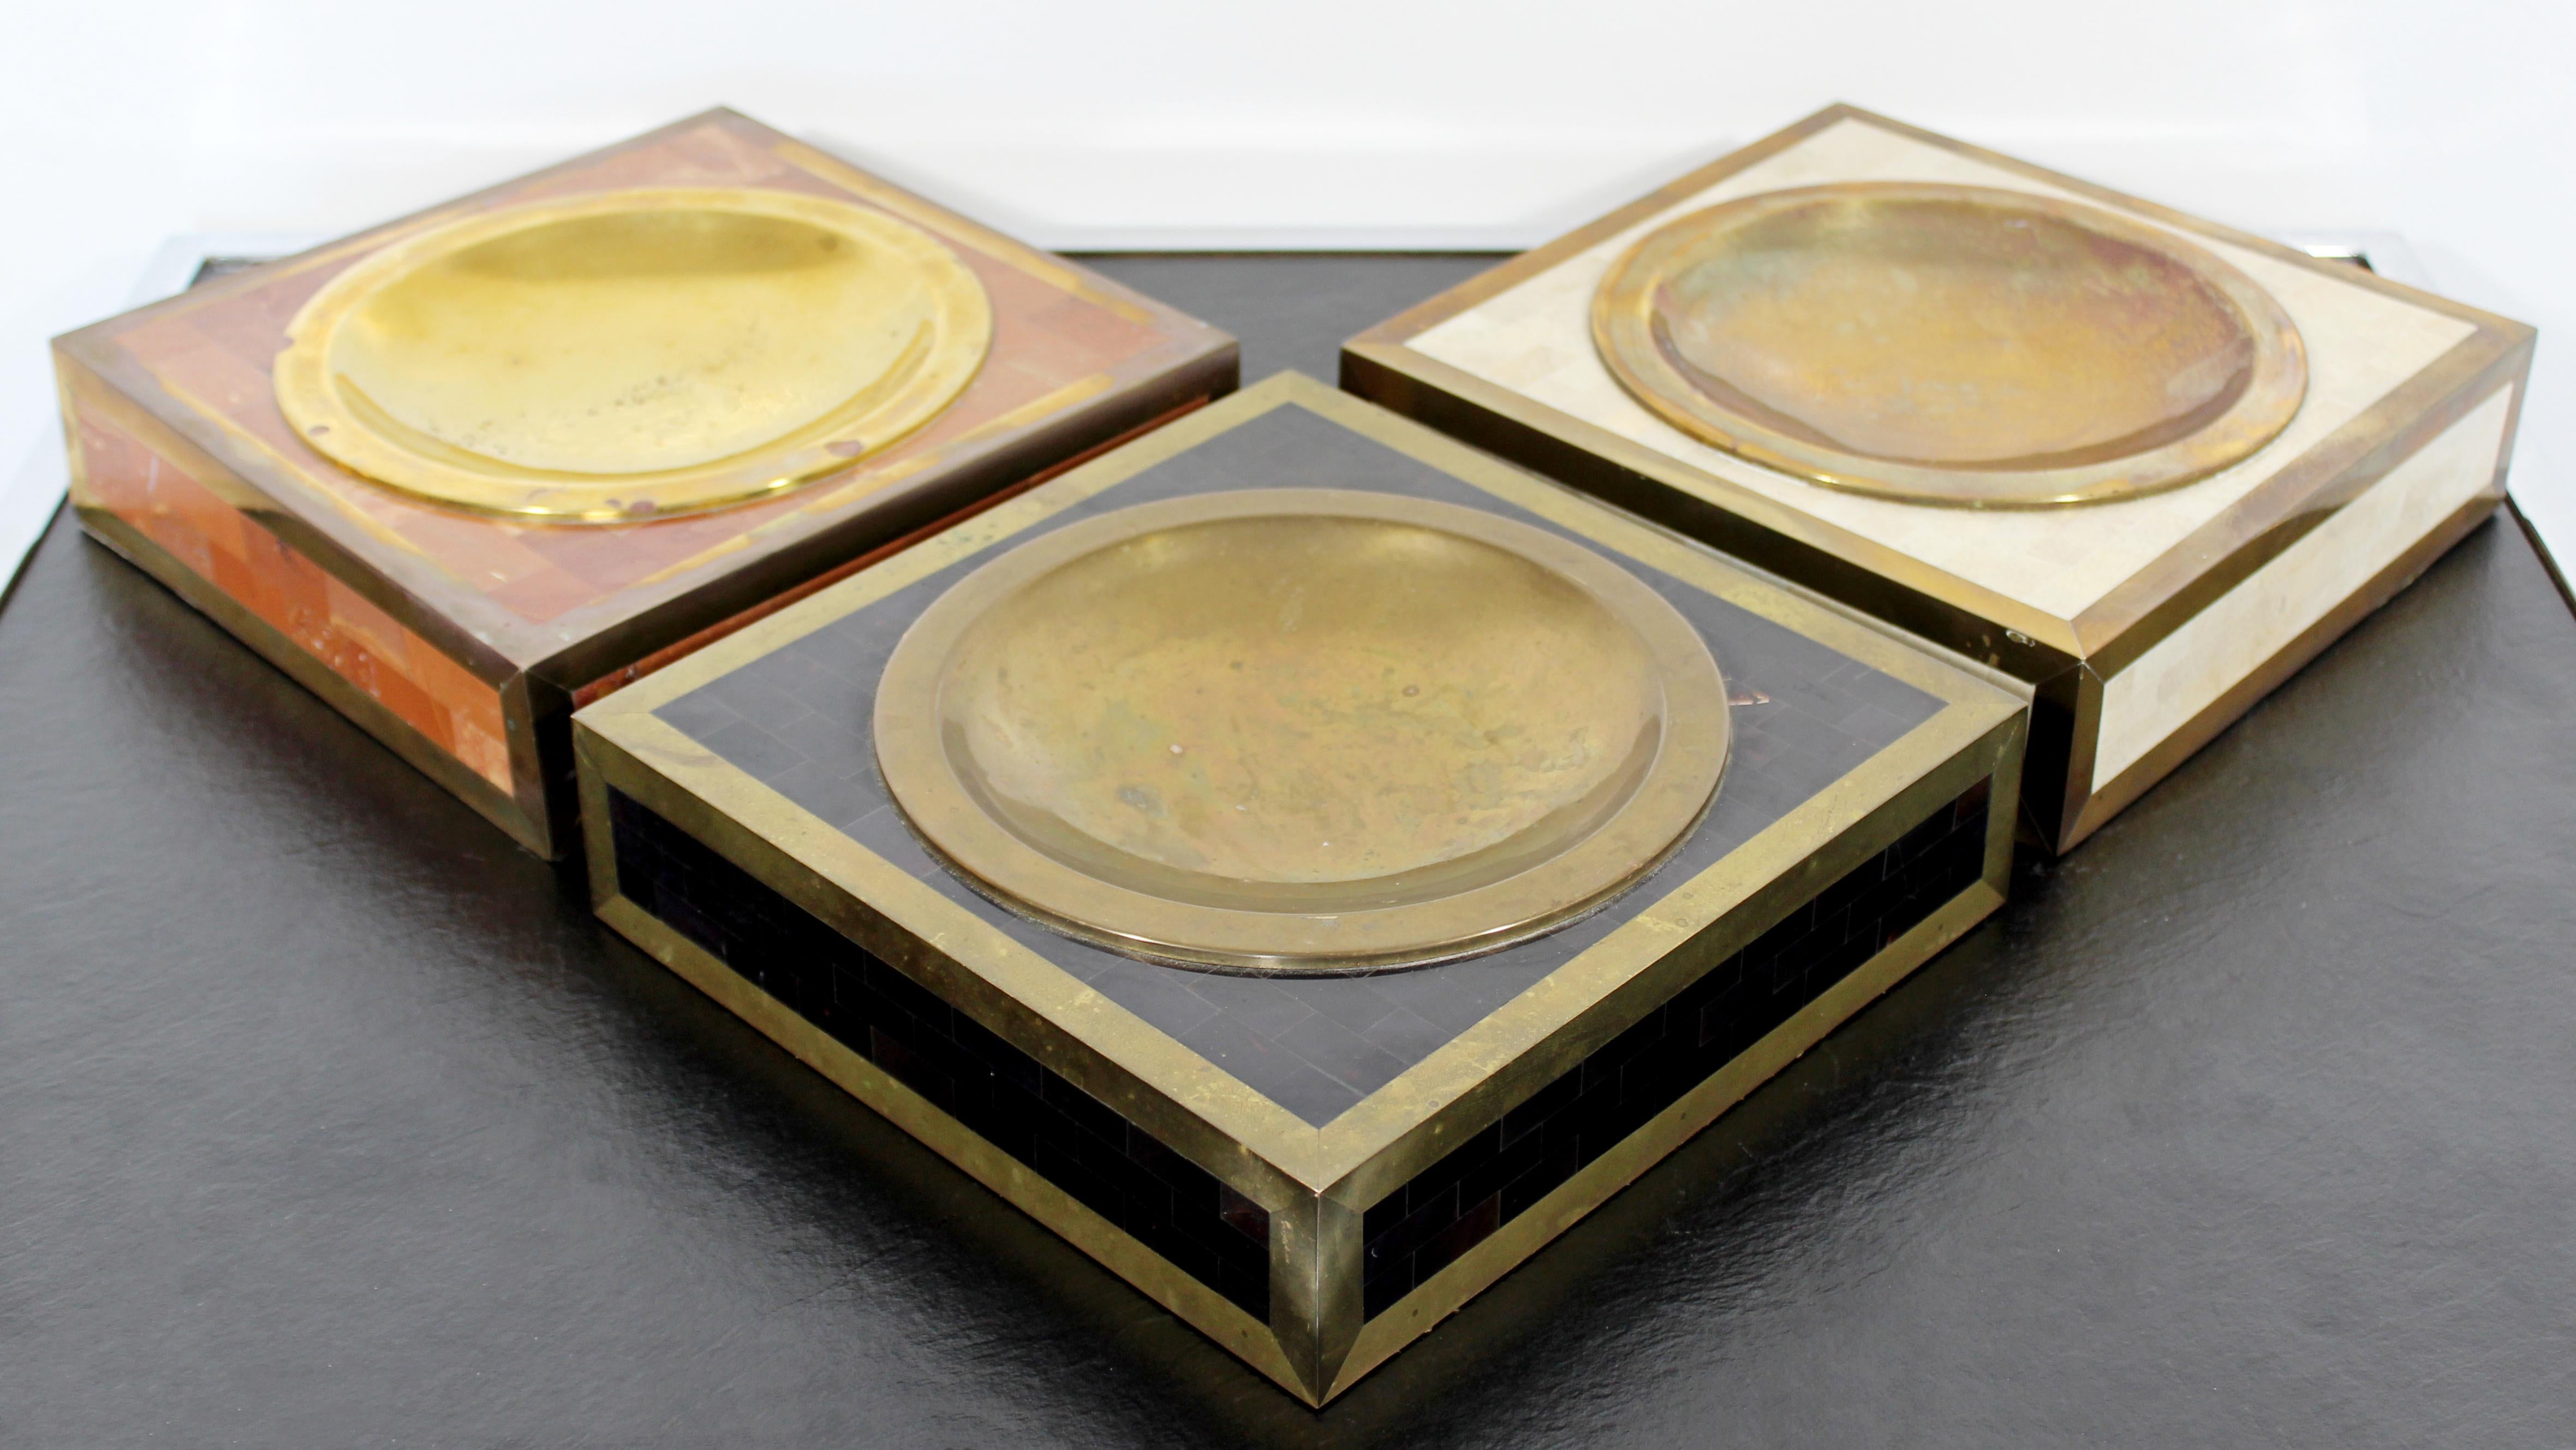 For your consideration is a fabulous, set of three tessellated stone and brass vide poche bowls, by Maitland-Smith, circa the 1980s. In excellent condition. The dimensions are 8.75